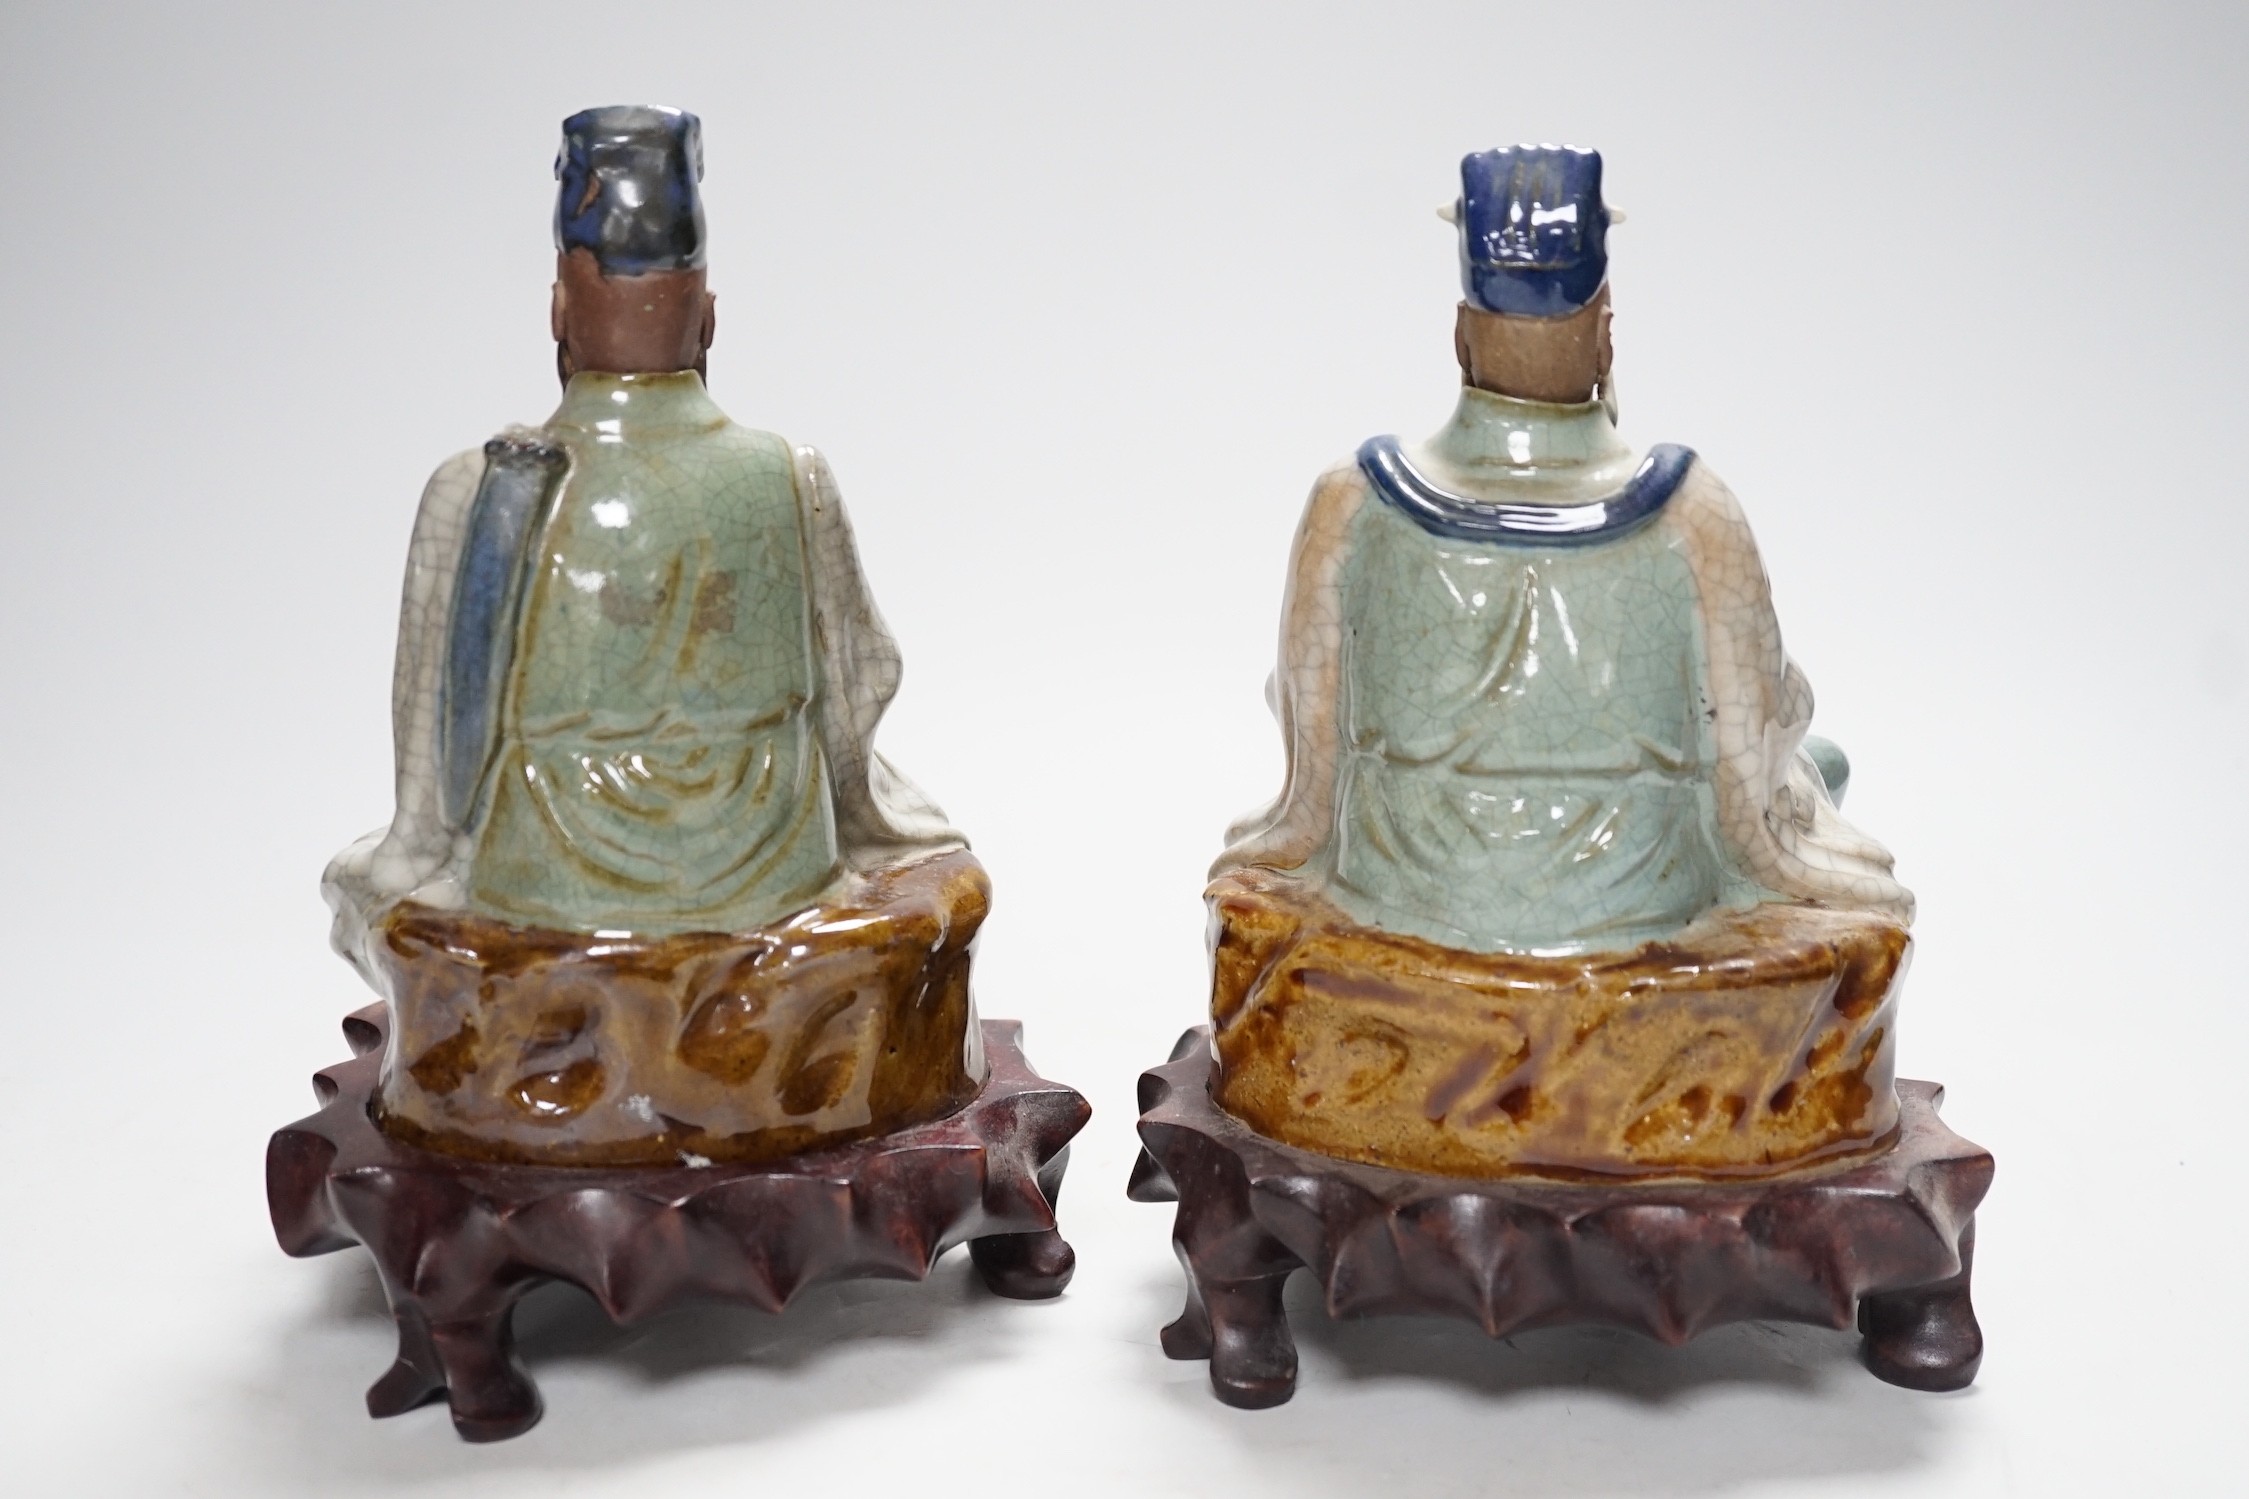 Two Shiwan stoneware figures of the Jade Emperor and Lu Dongbin, losses, 19cm